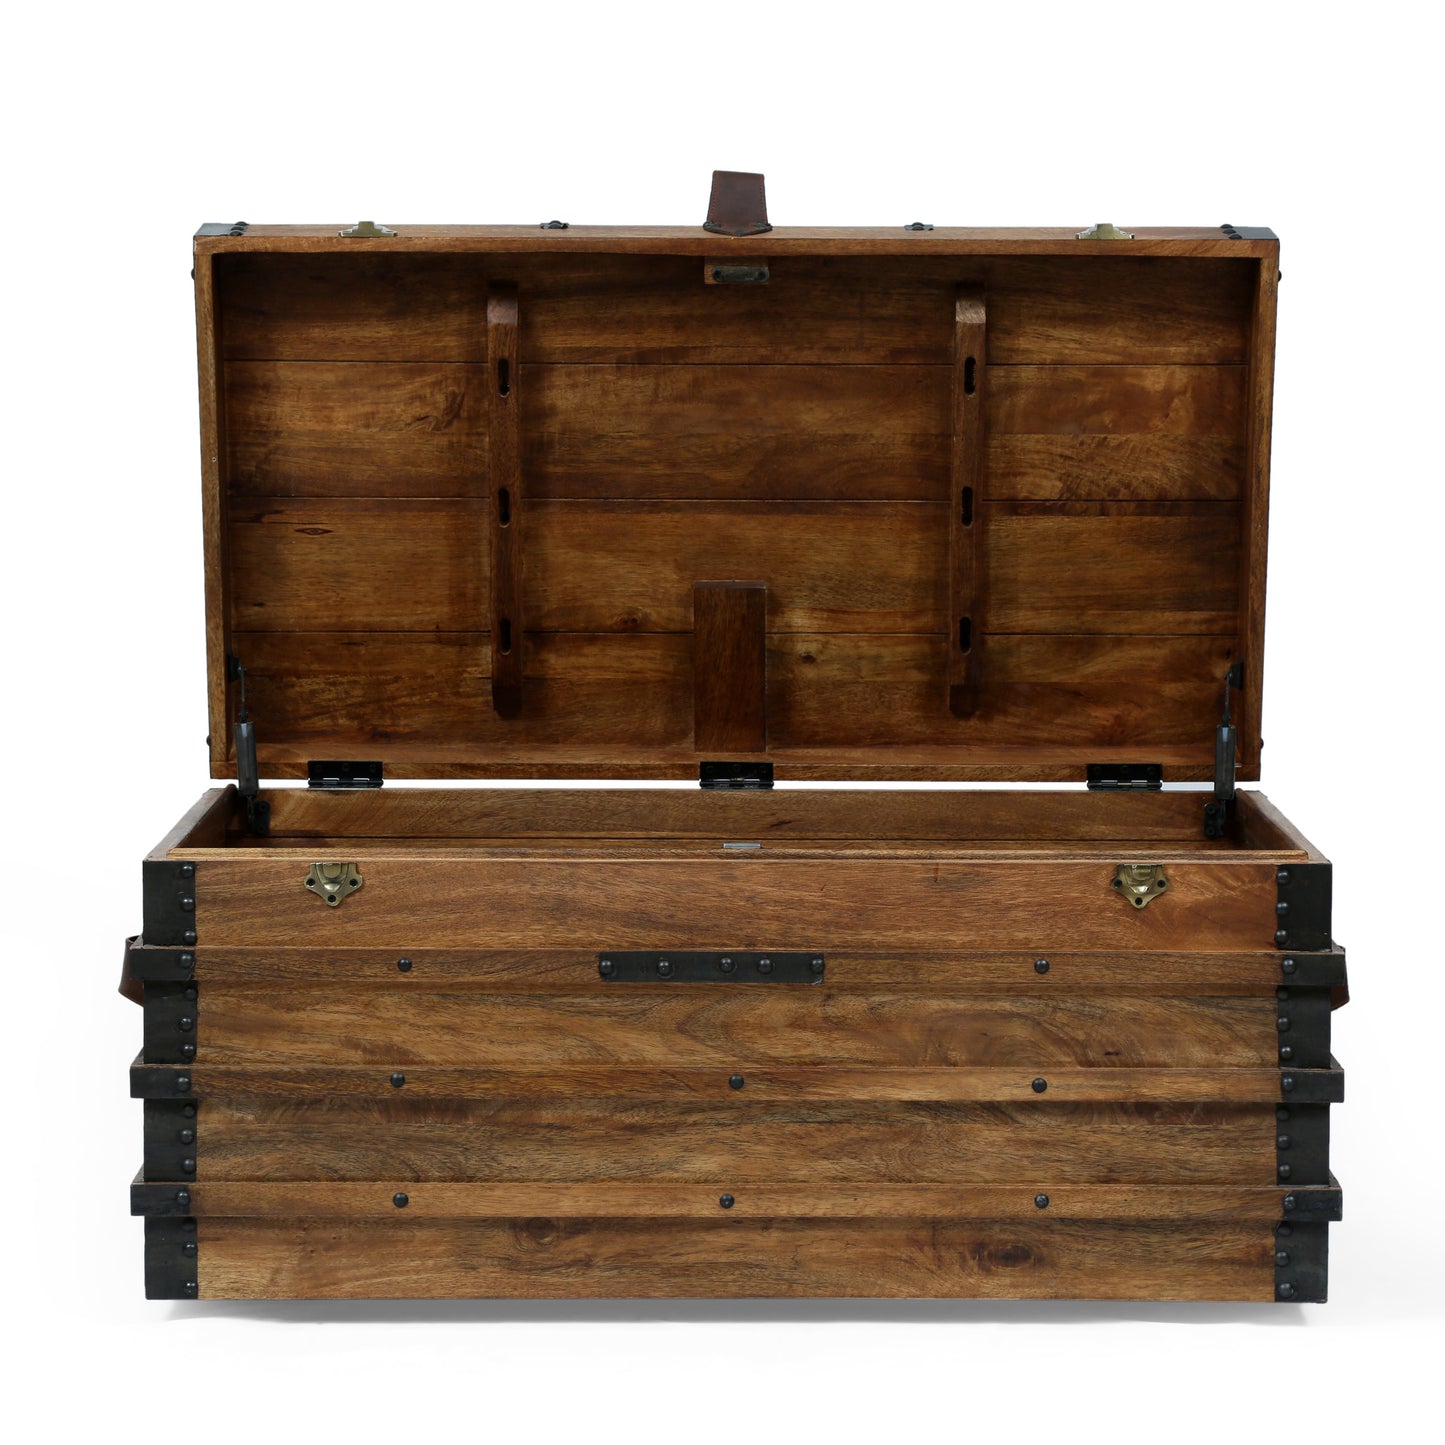 Stanton Handcrafted Boho Wood Storage Trunk with Latches